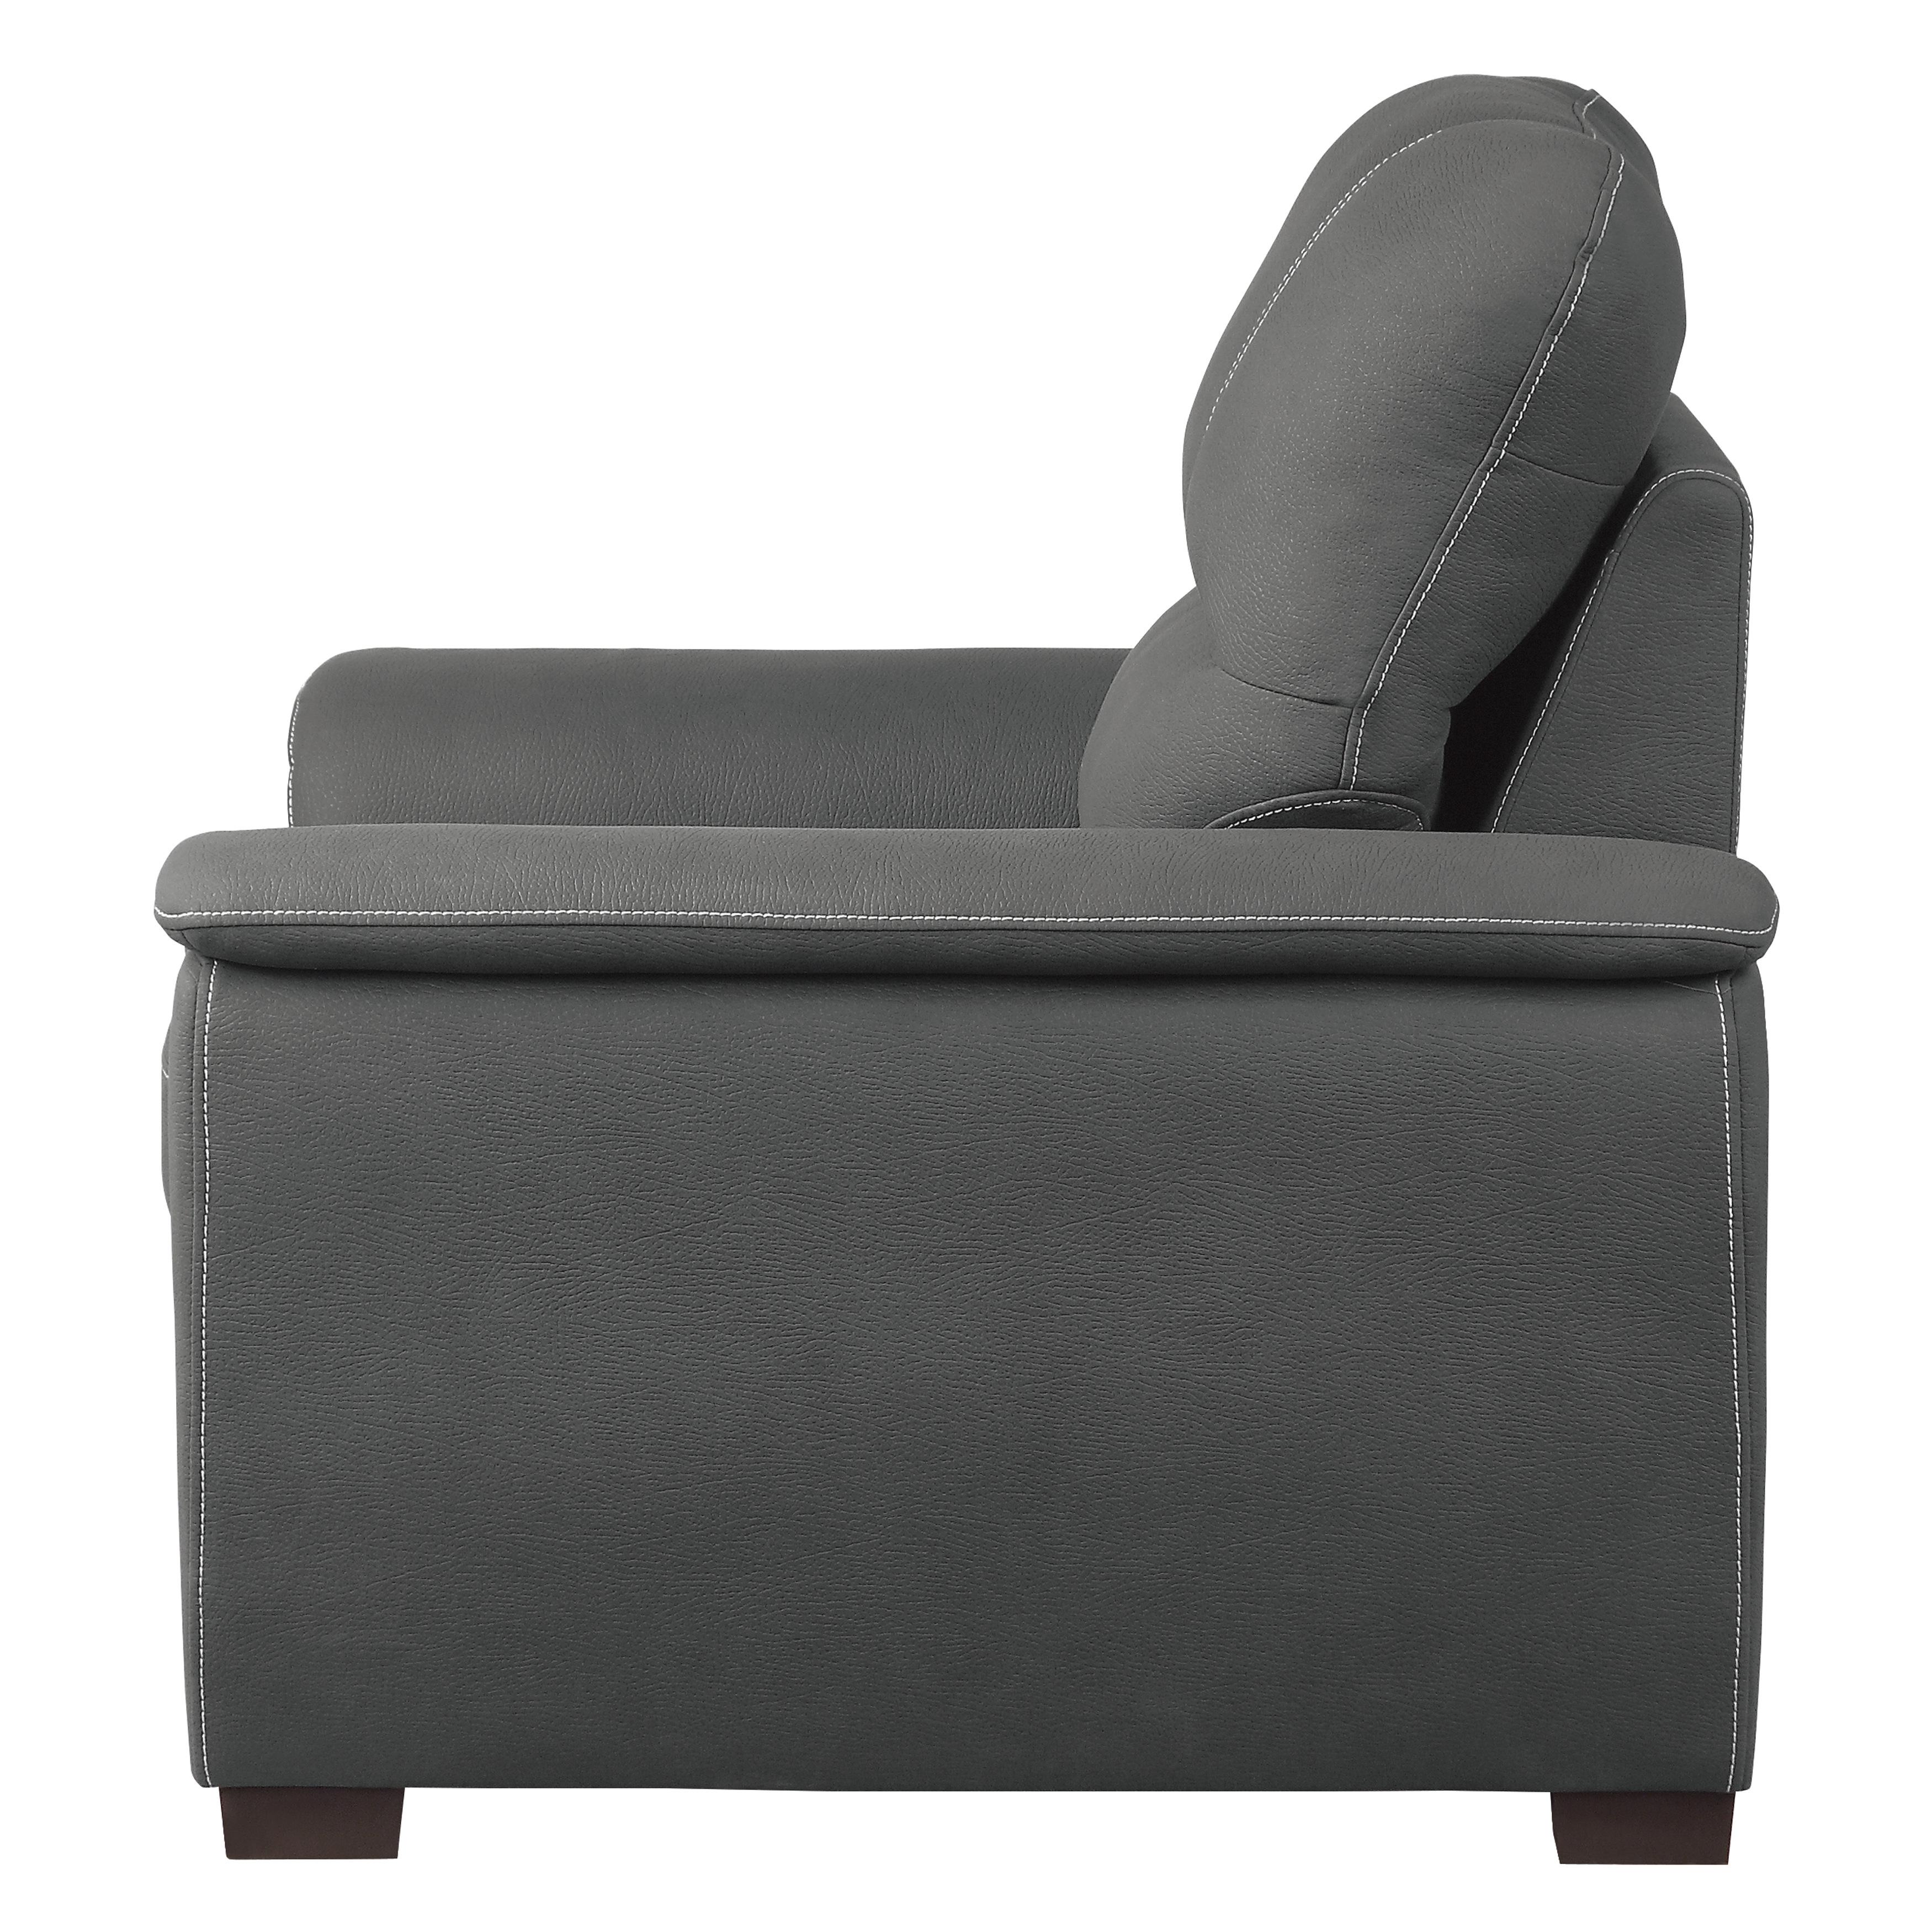 

    
Homelegance 9858GY-1 Andes Arm Chair Gray 9858GY-1
